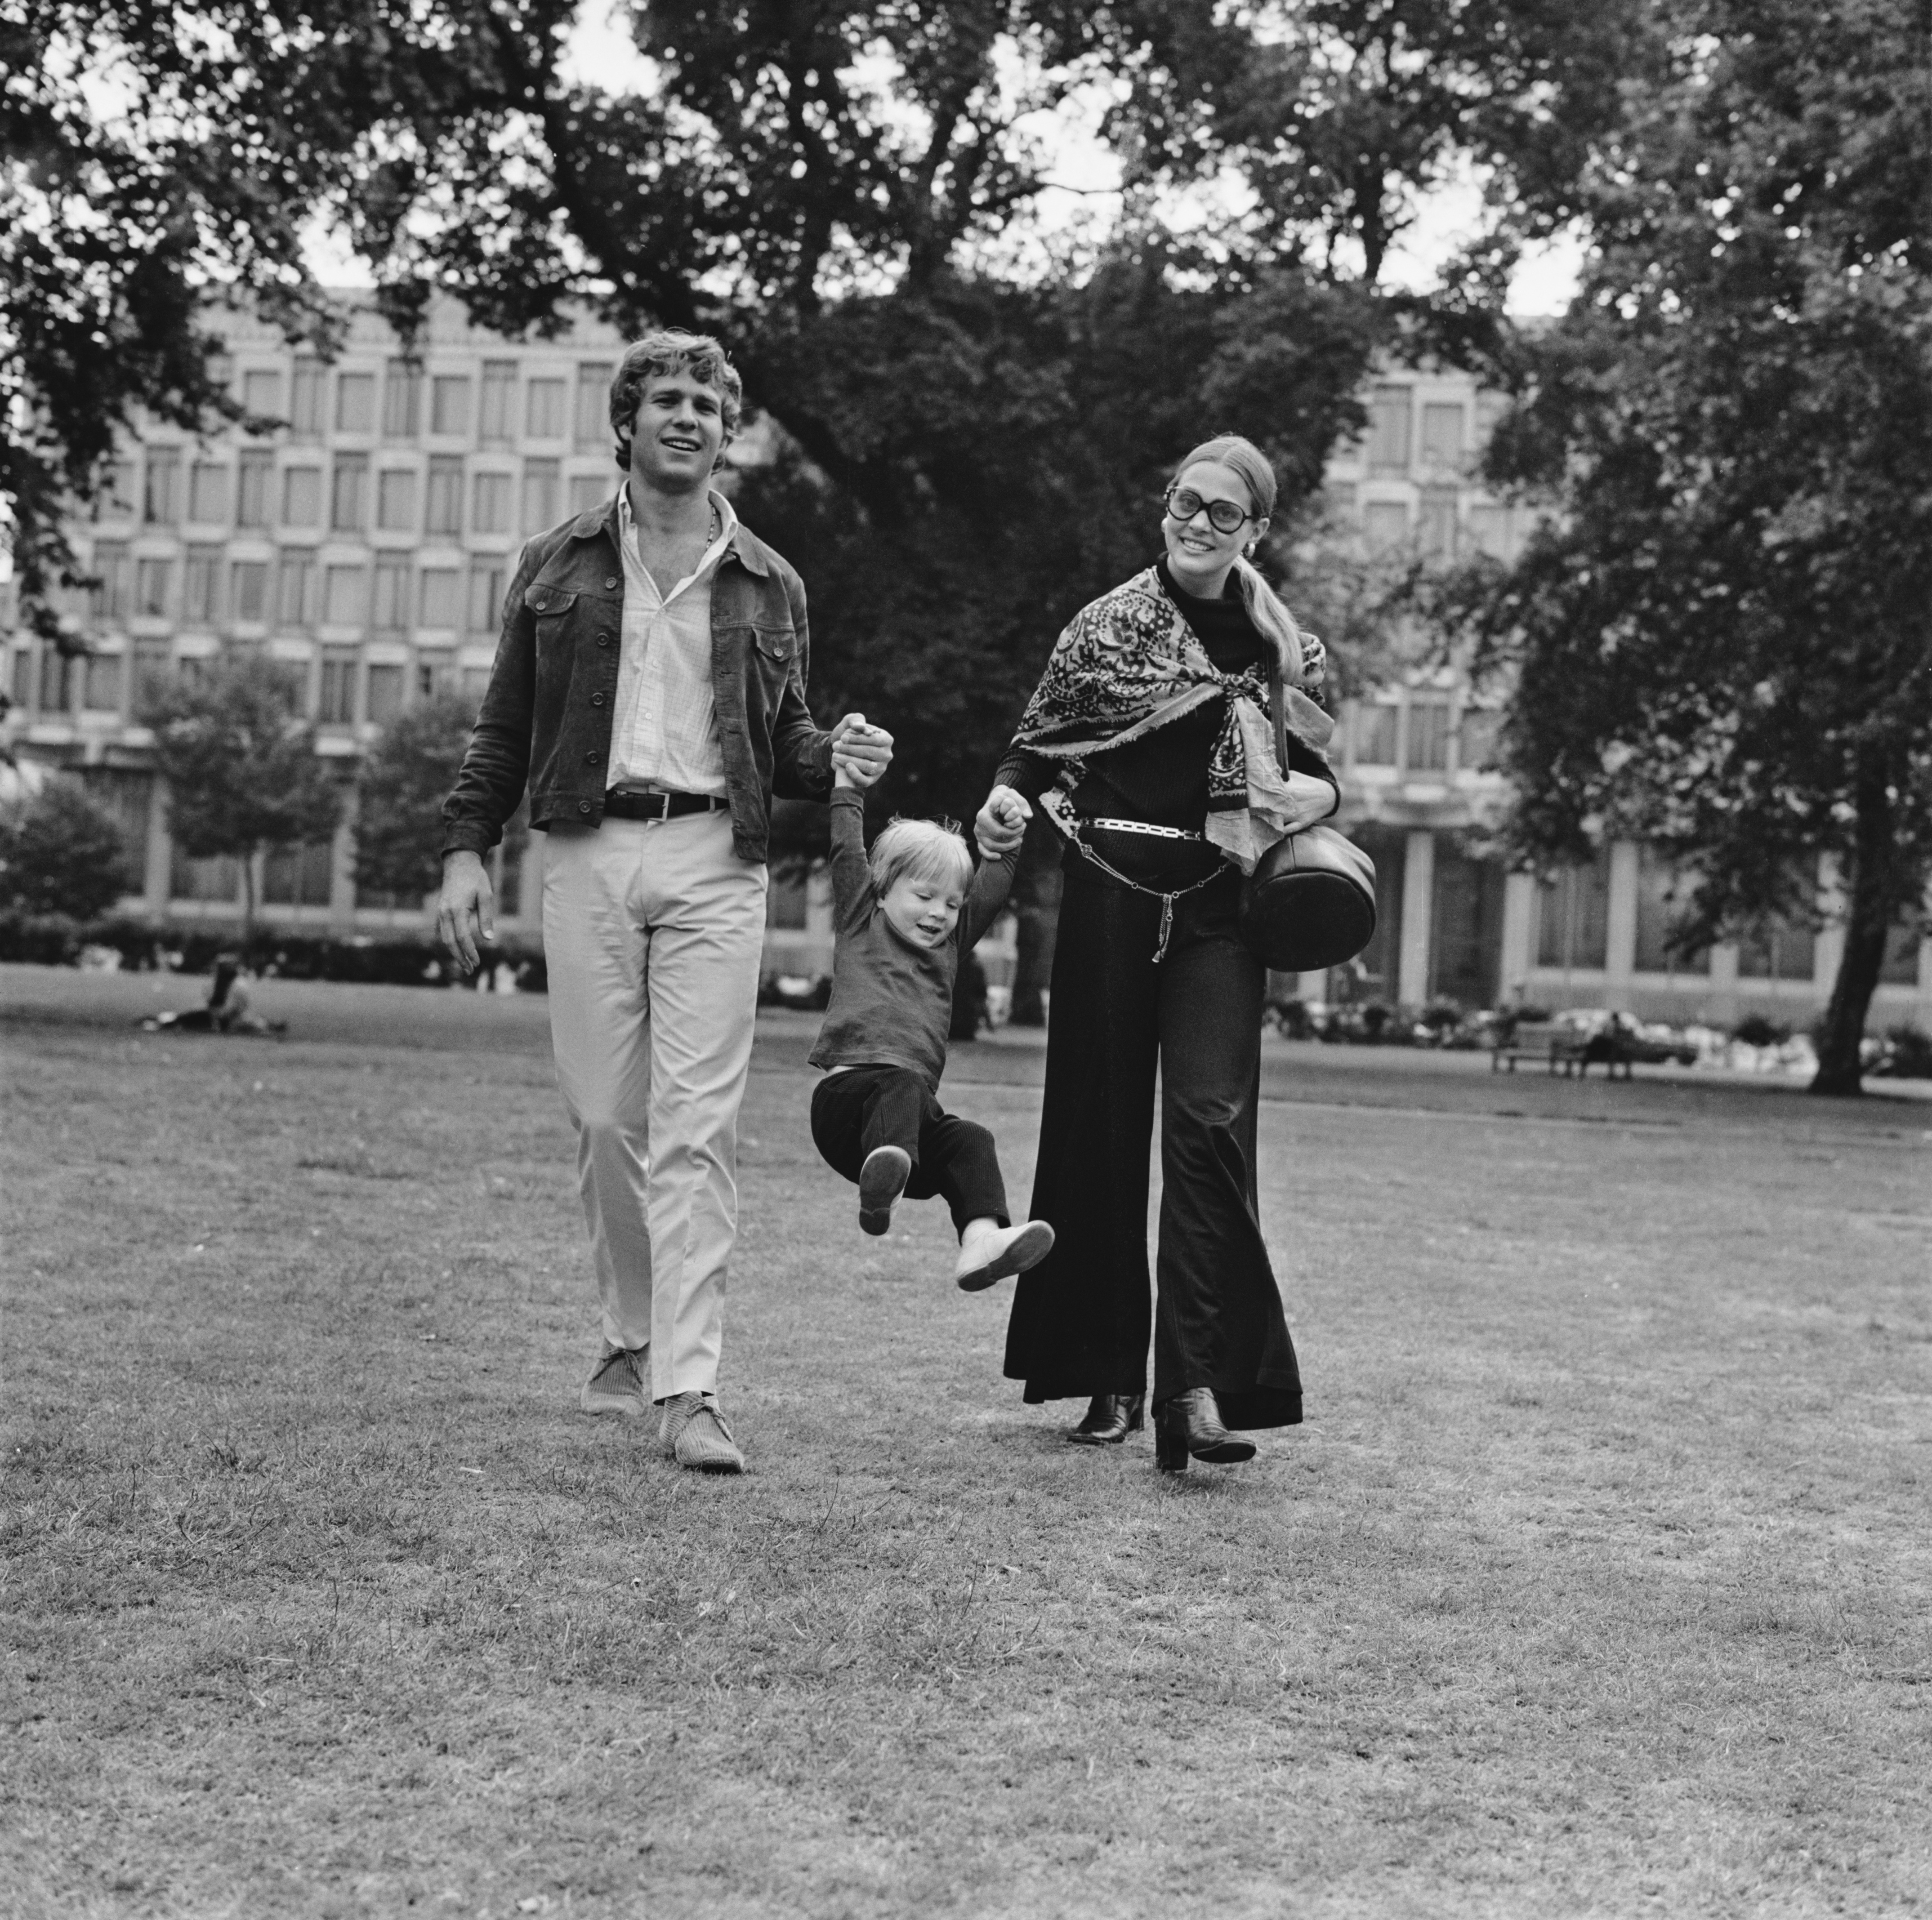 Ryan O'Neal and Leigh Taylor-Young, and their son, Patrick O'Neal, in London for a family holiday on August 1, 1969 | Source: Getty Images